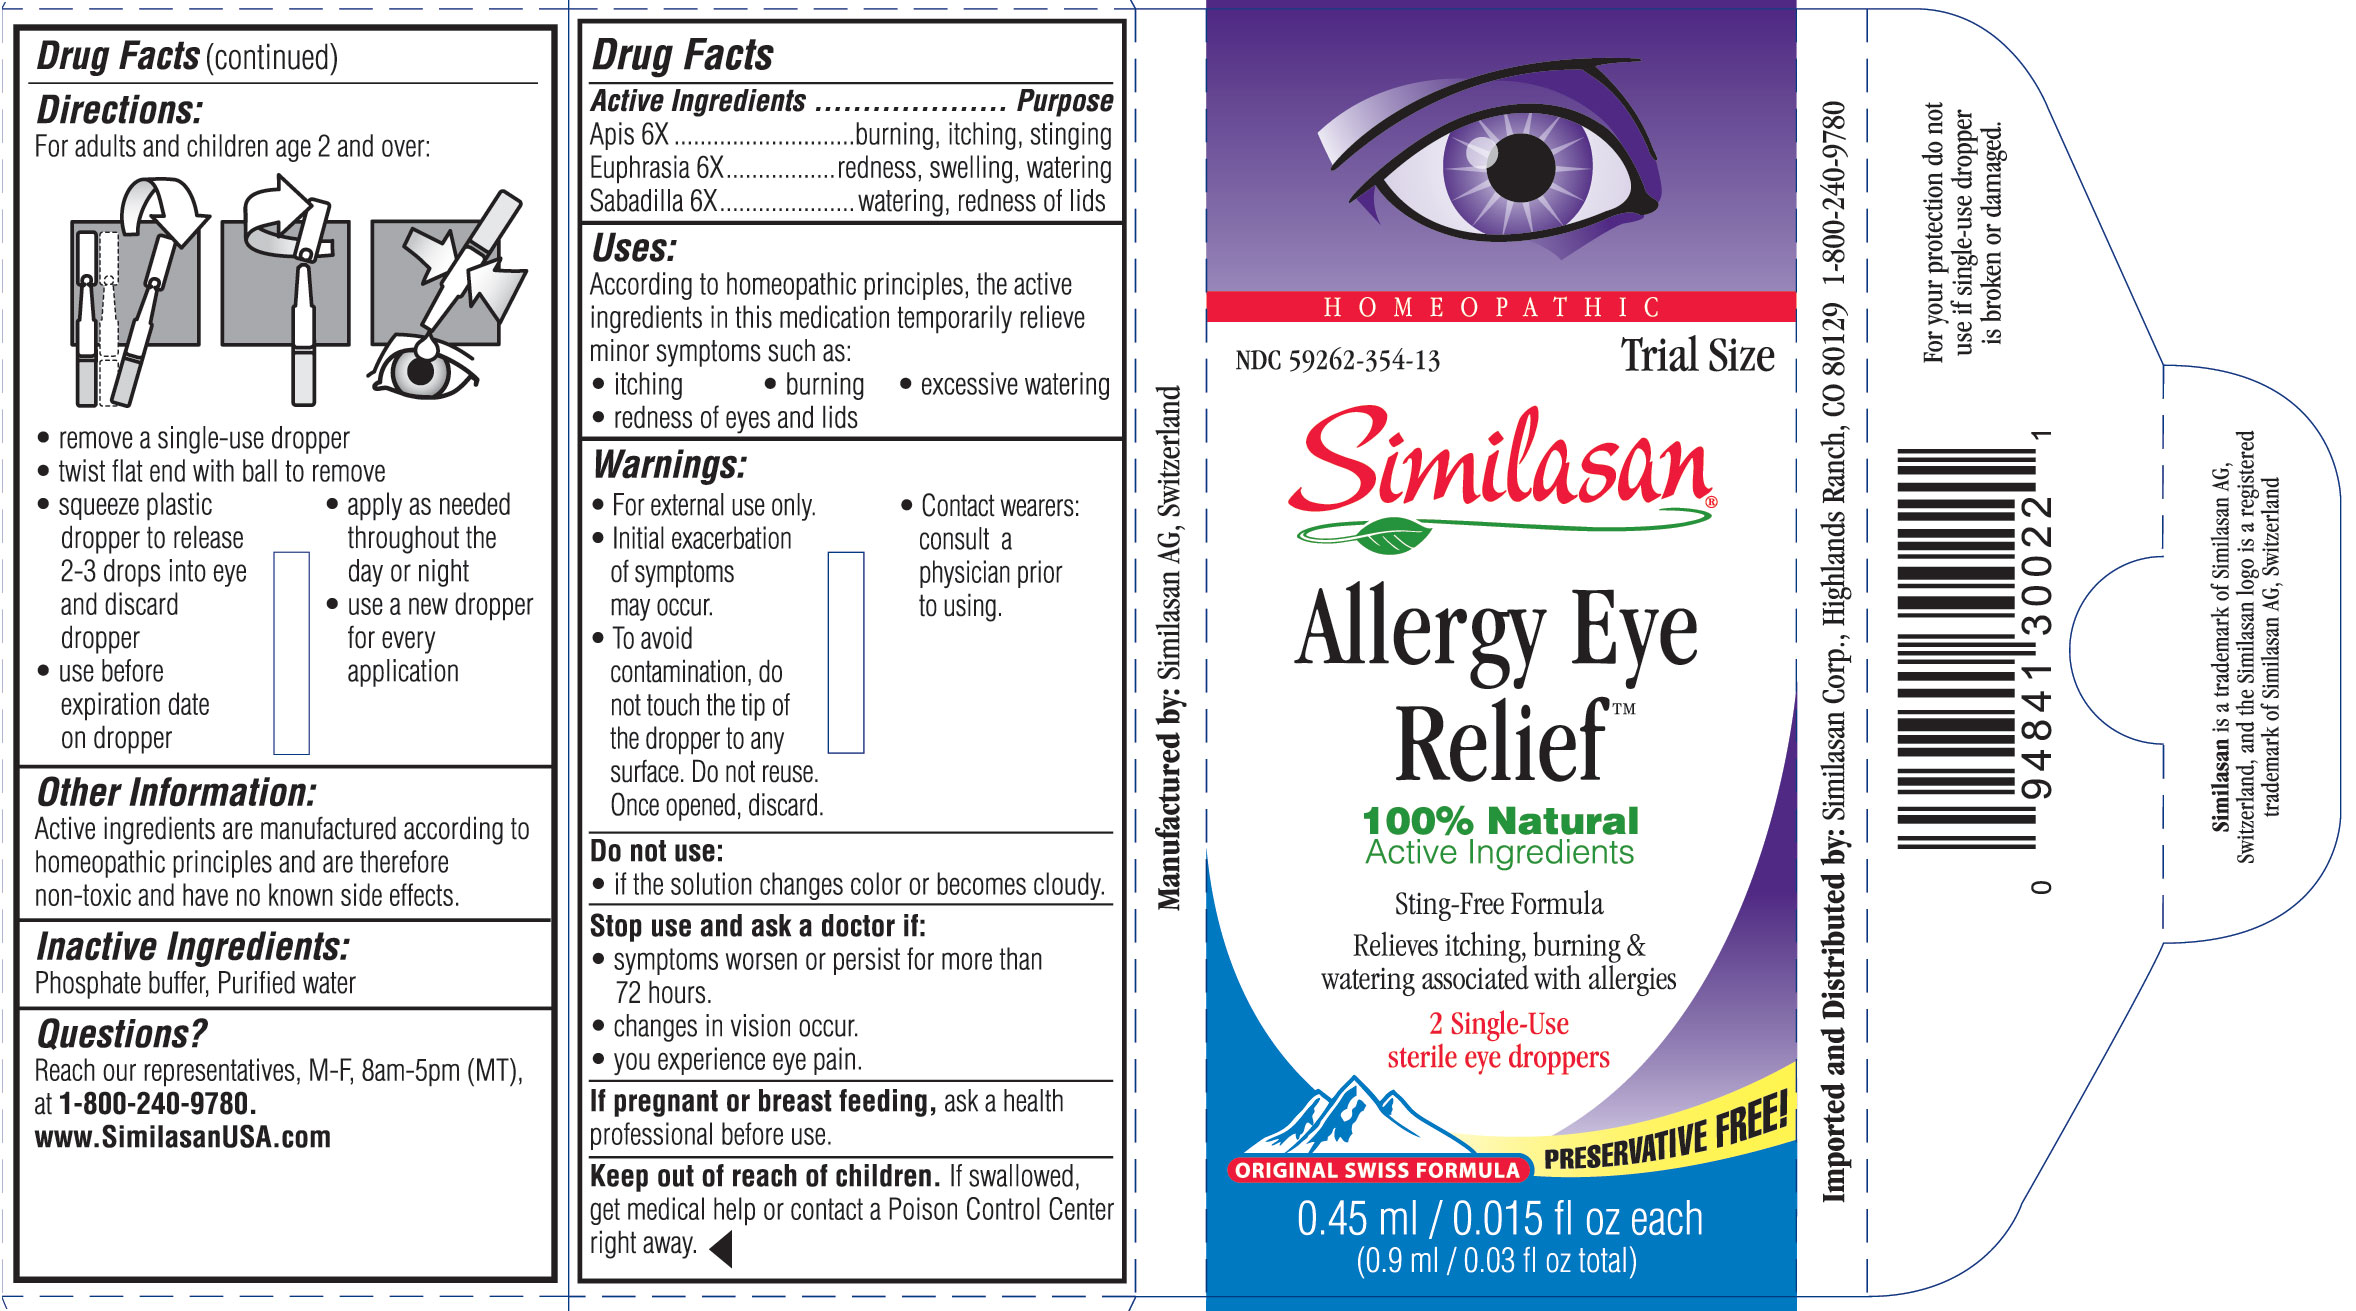 Homeopathic NDC 59262-354-13 Similasan Allergy Eye Relief 2 Single-Use sterile eye droppers